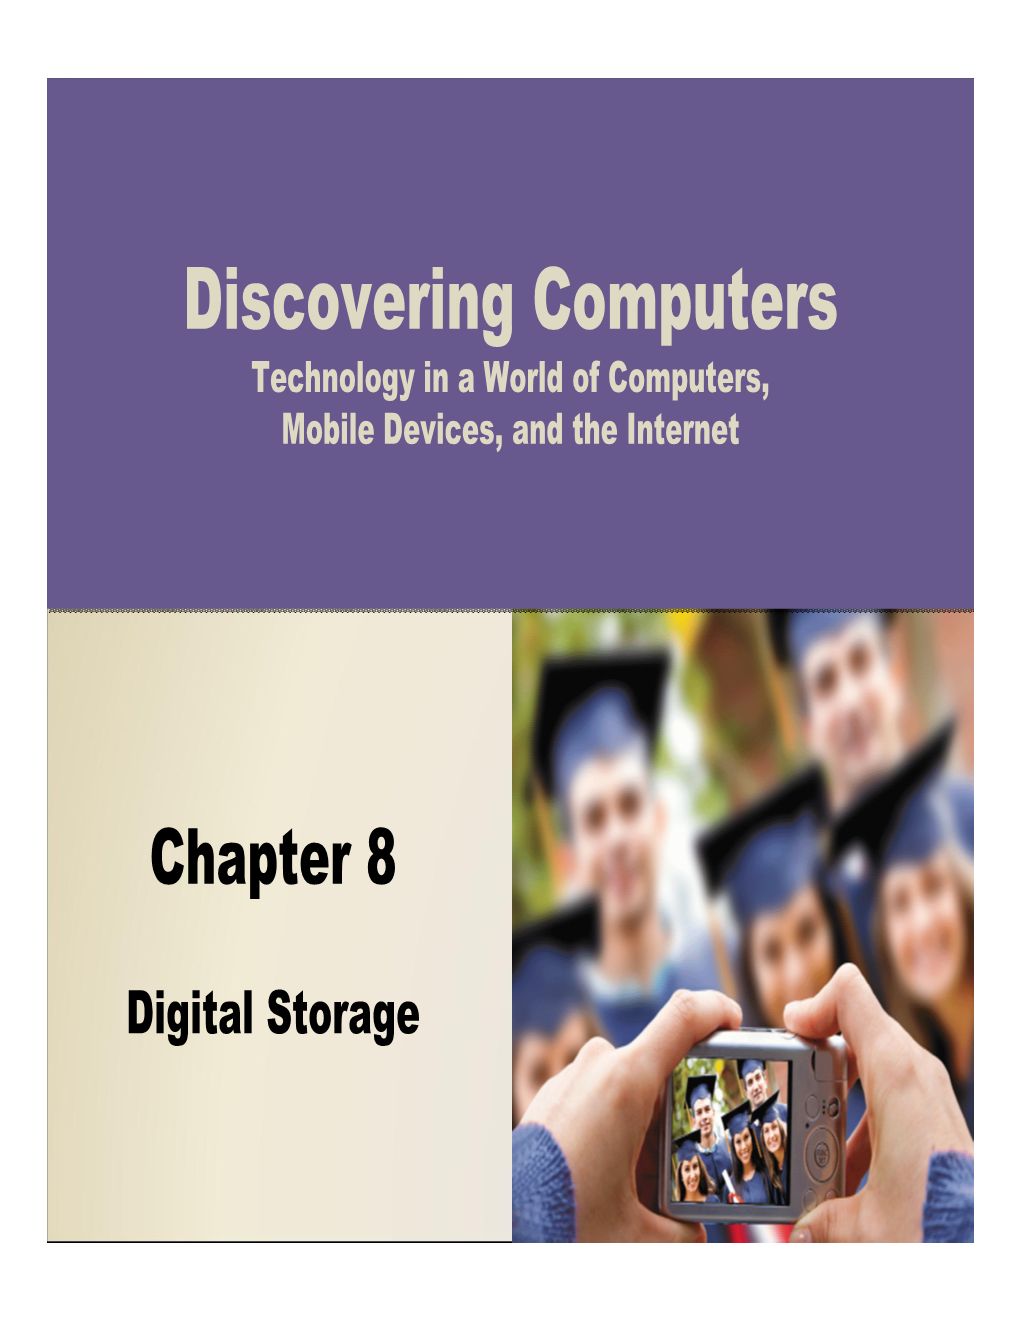 Discovering Computers Technology in a World of Computers, Mobile Devices, and the Internet